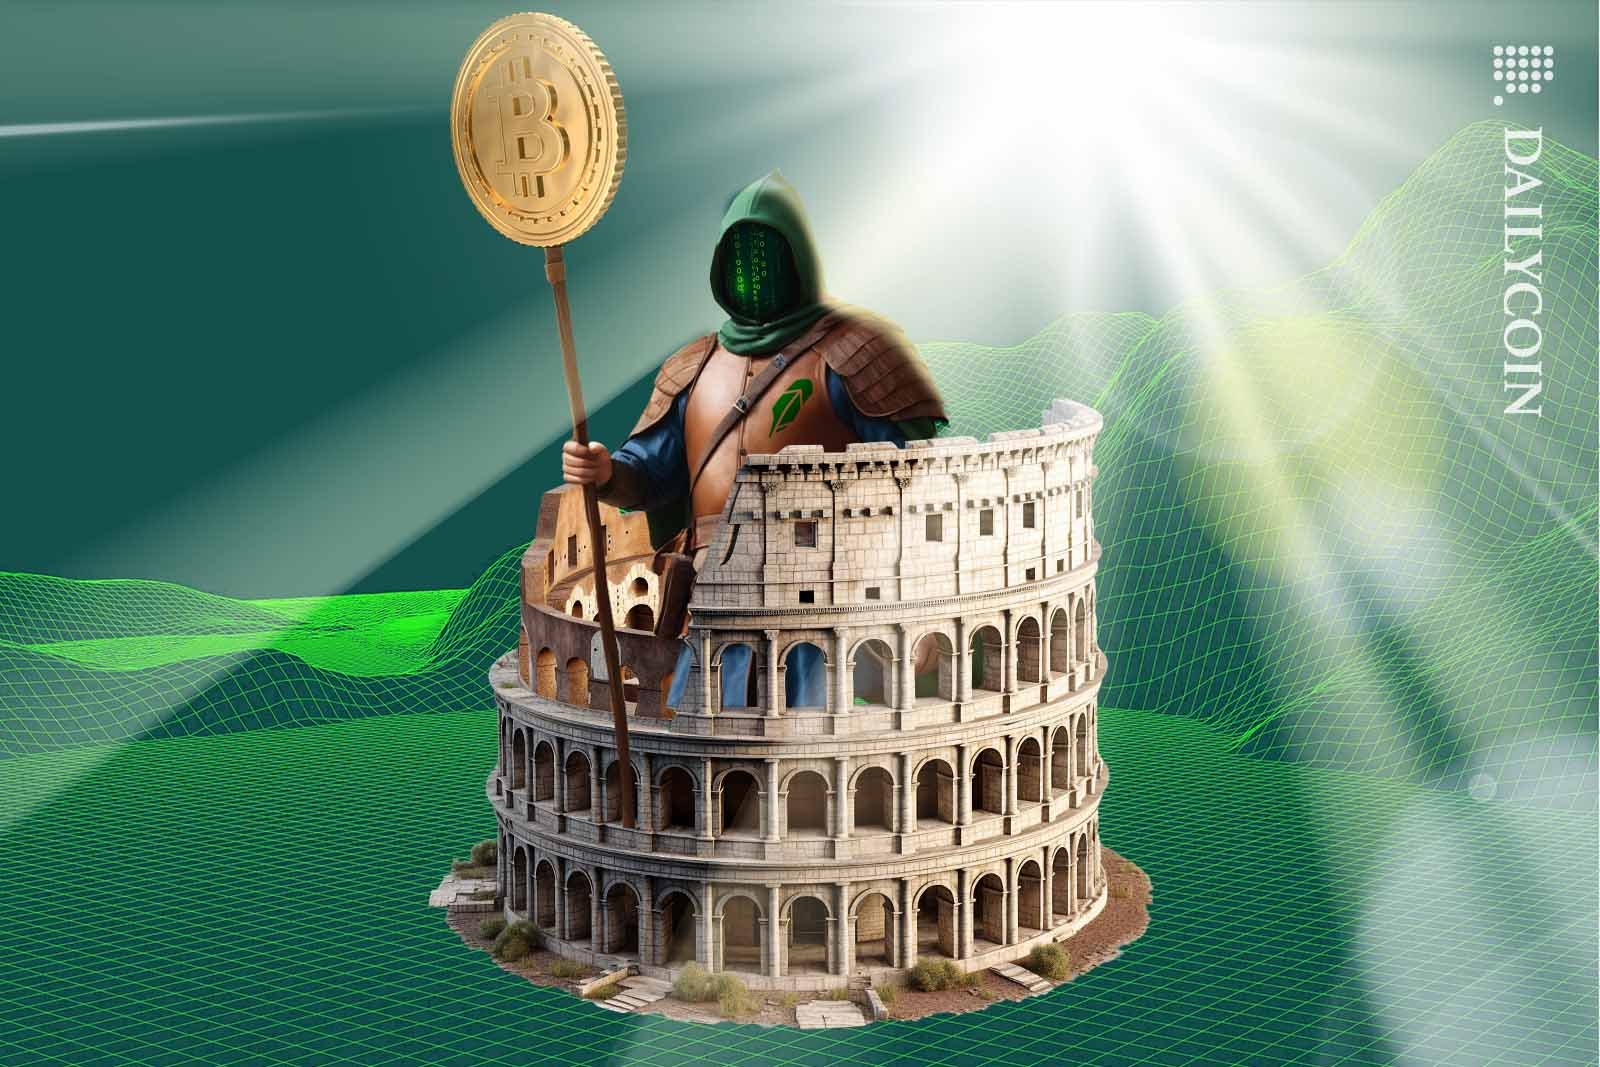 Robin Hood standing in the Colosseum holding up a Bitcoin.